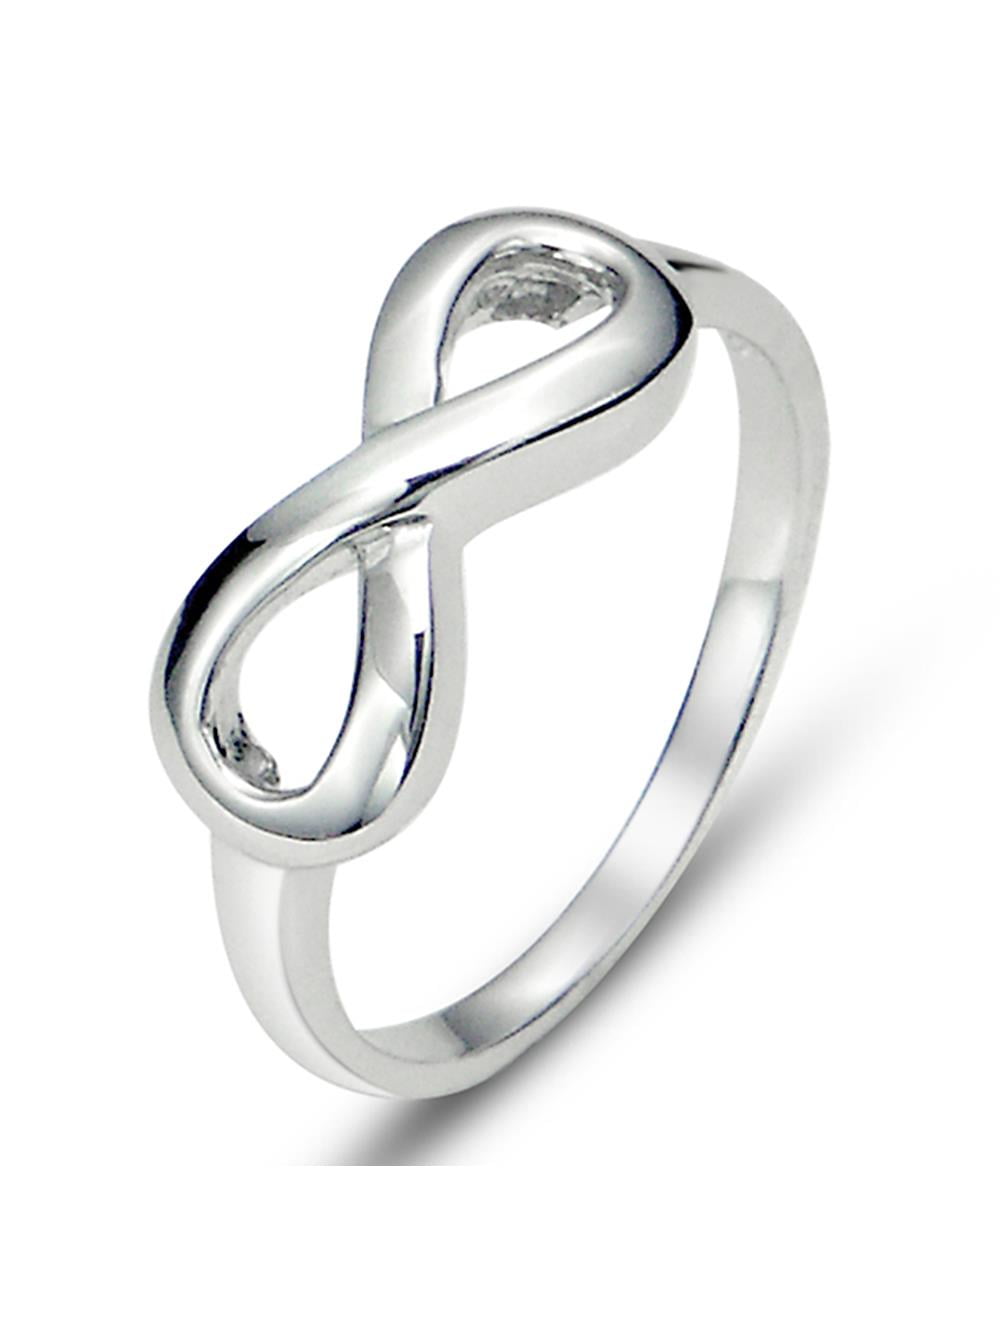 8, 9 WithLoveSilver 925 Sterling Silver Infinity Symbol Wedding Band Ring Size 